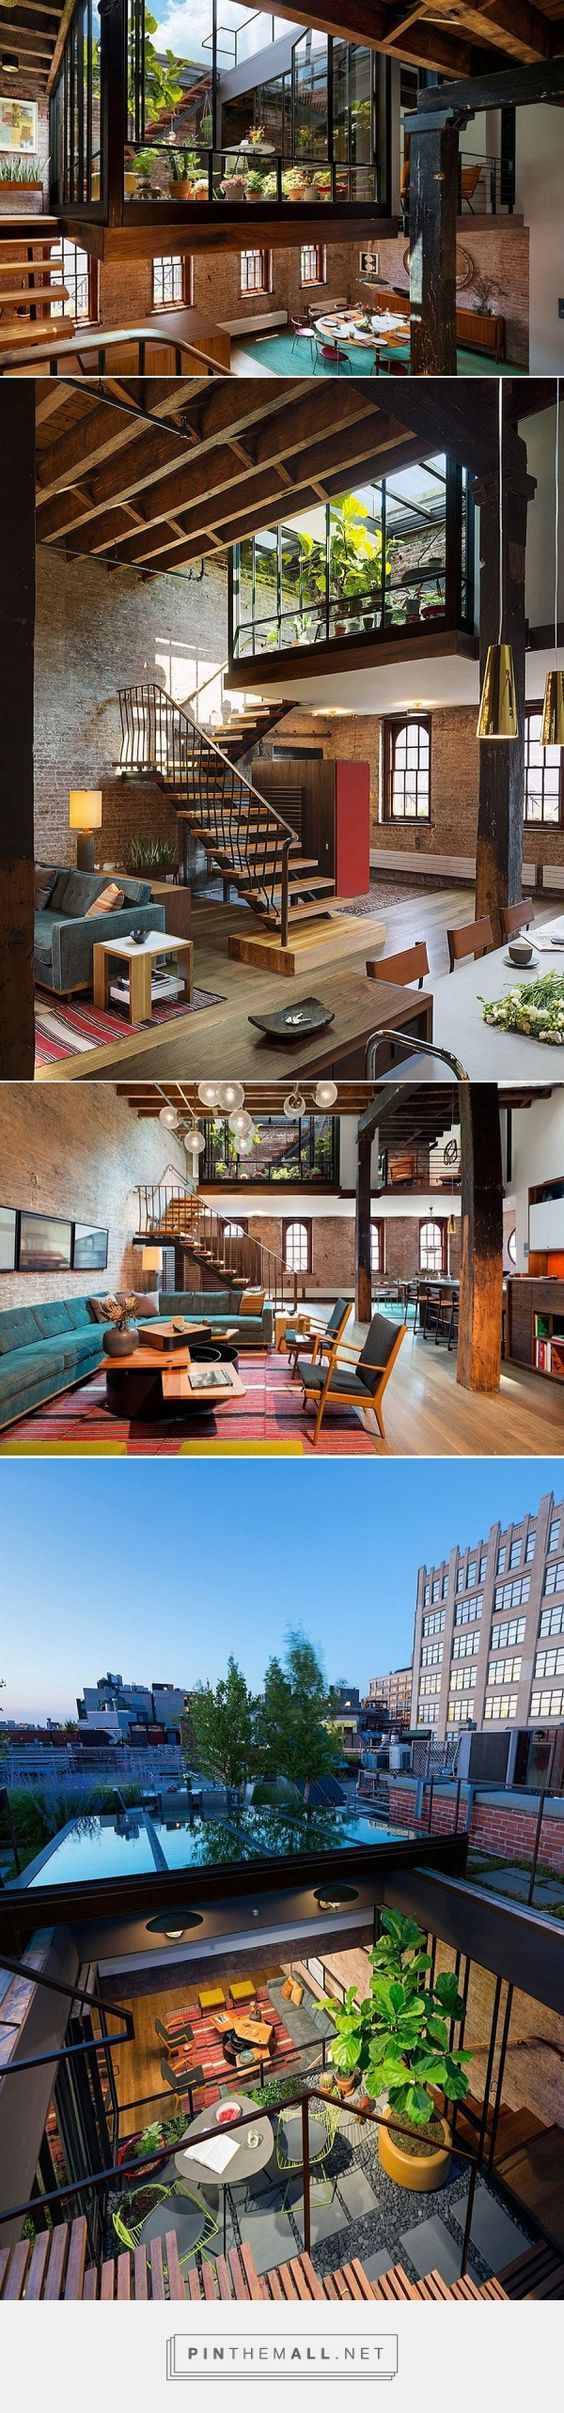 Old Caviar Warehouse Converted into a Sensational NYC Loft – garden space dropped